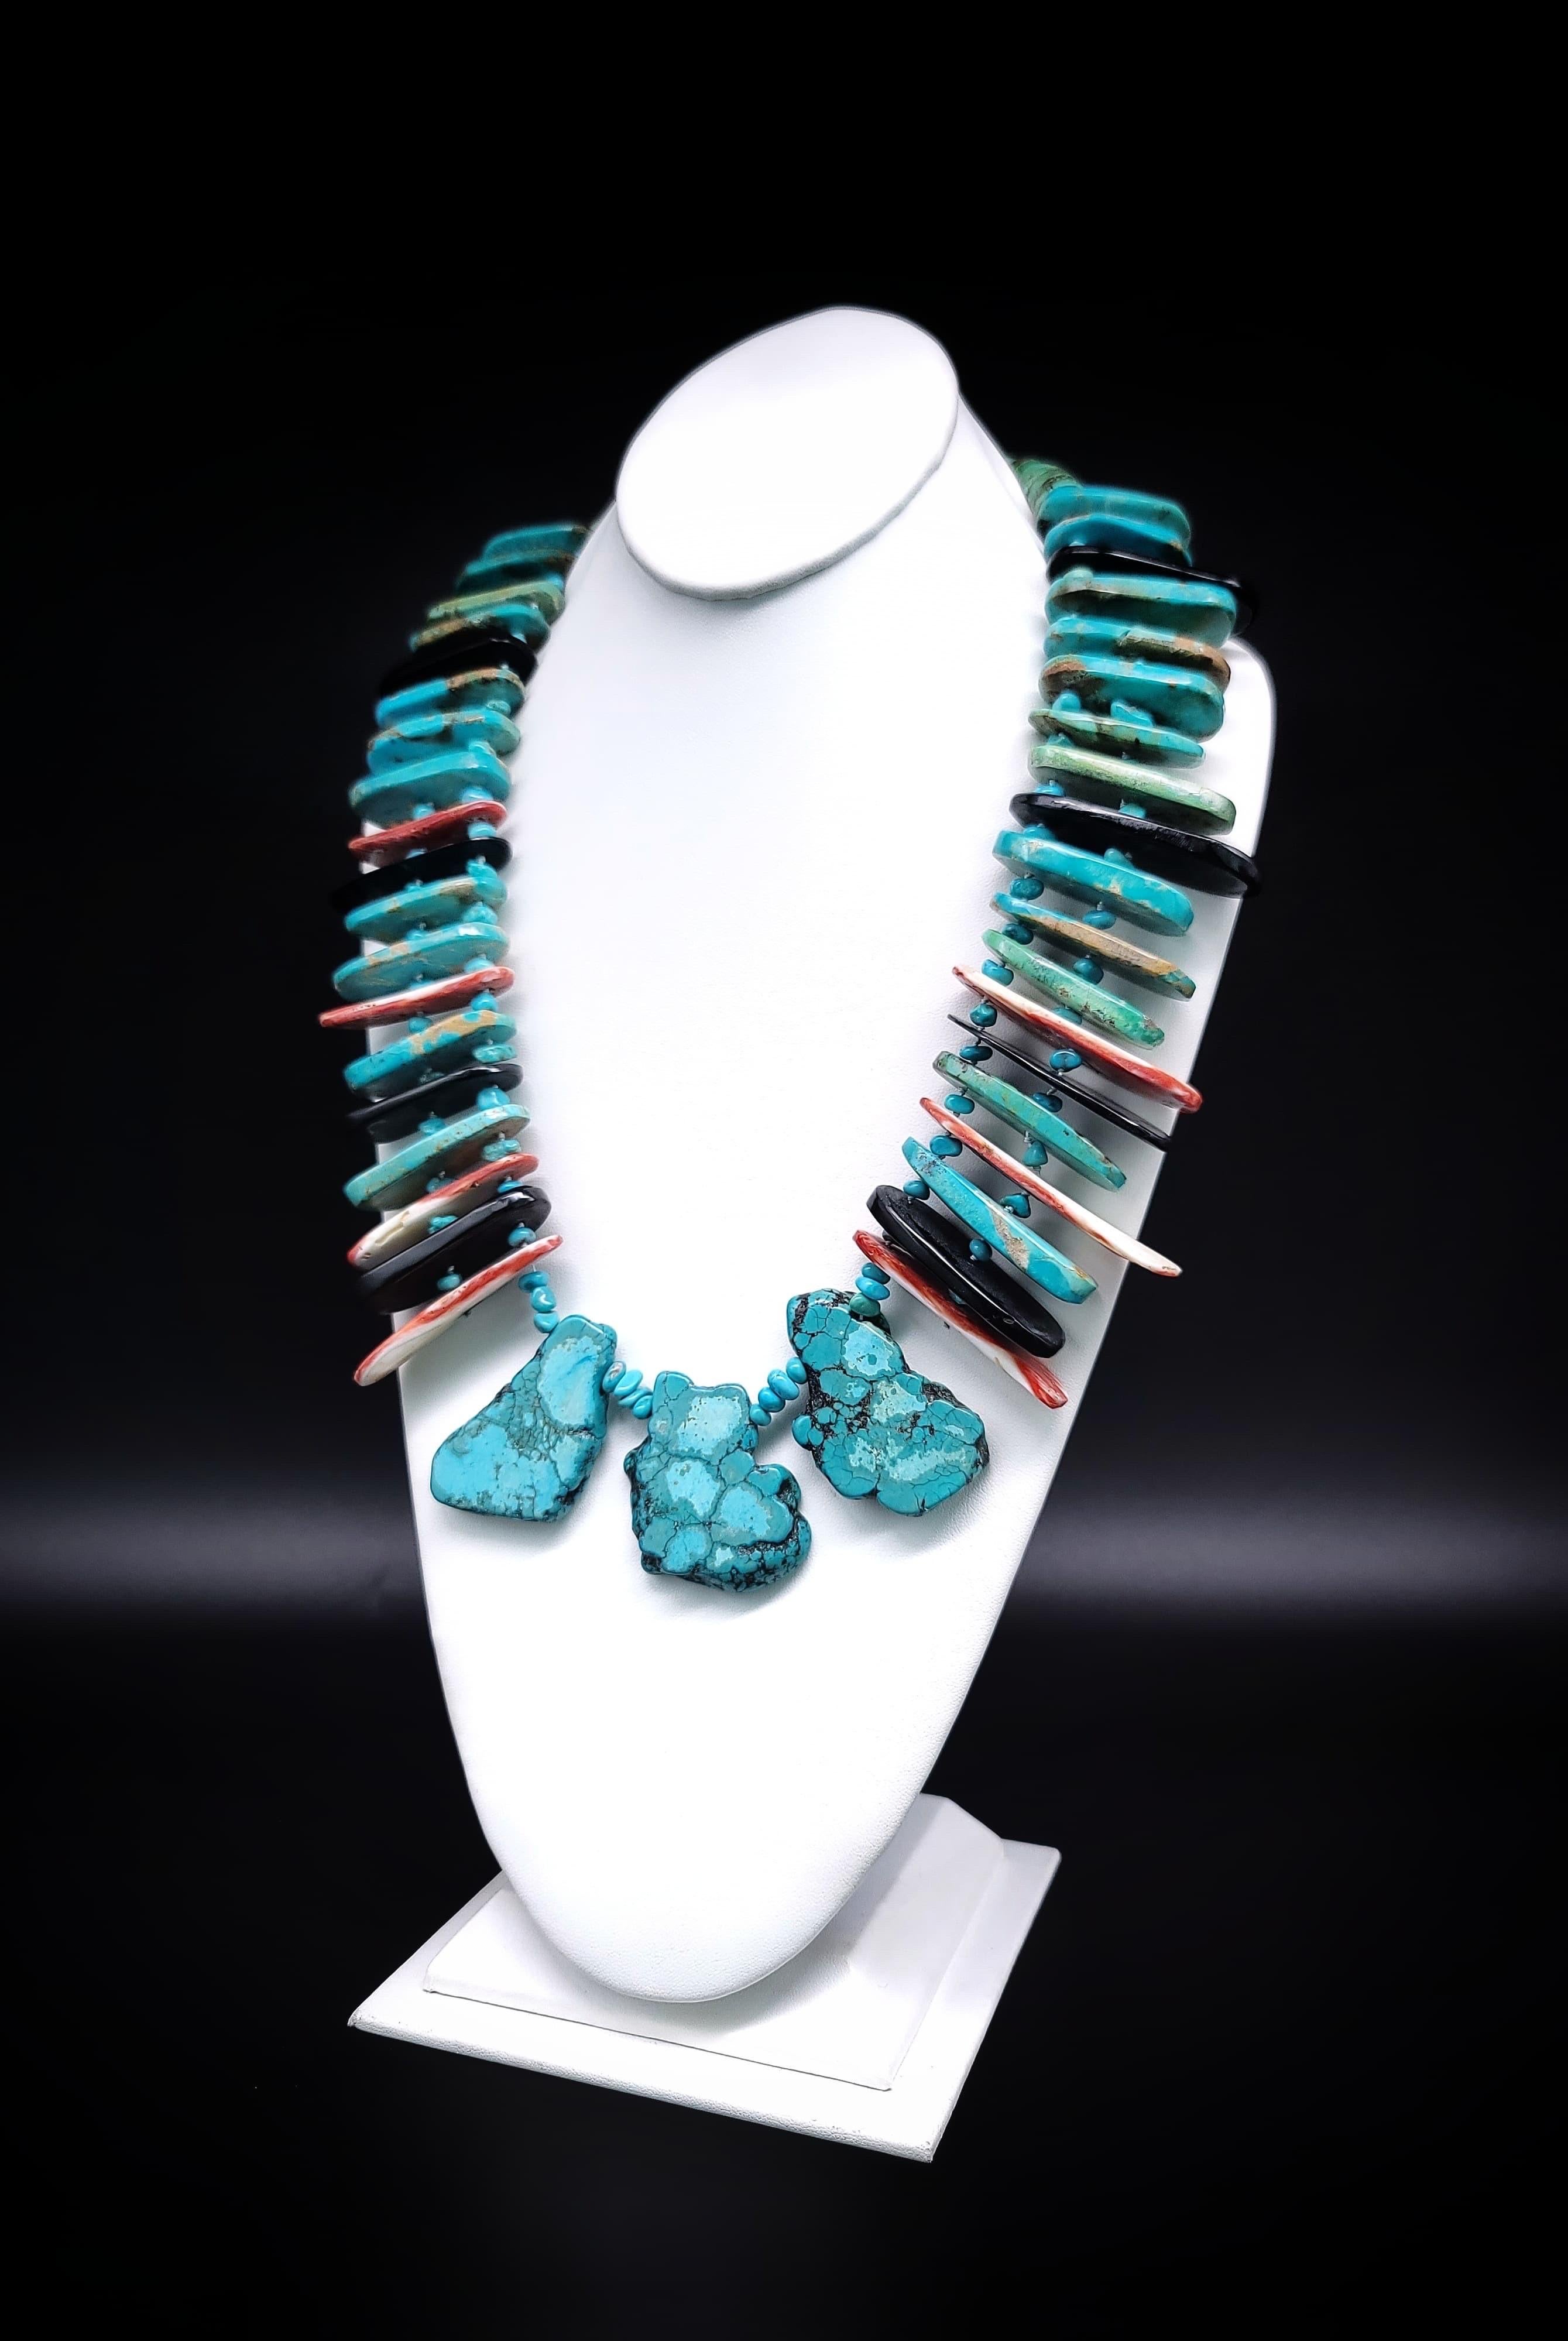 A.Jeschel Massive Showstopping Turquoise Necklace. 11